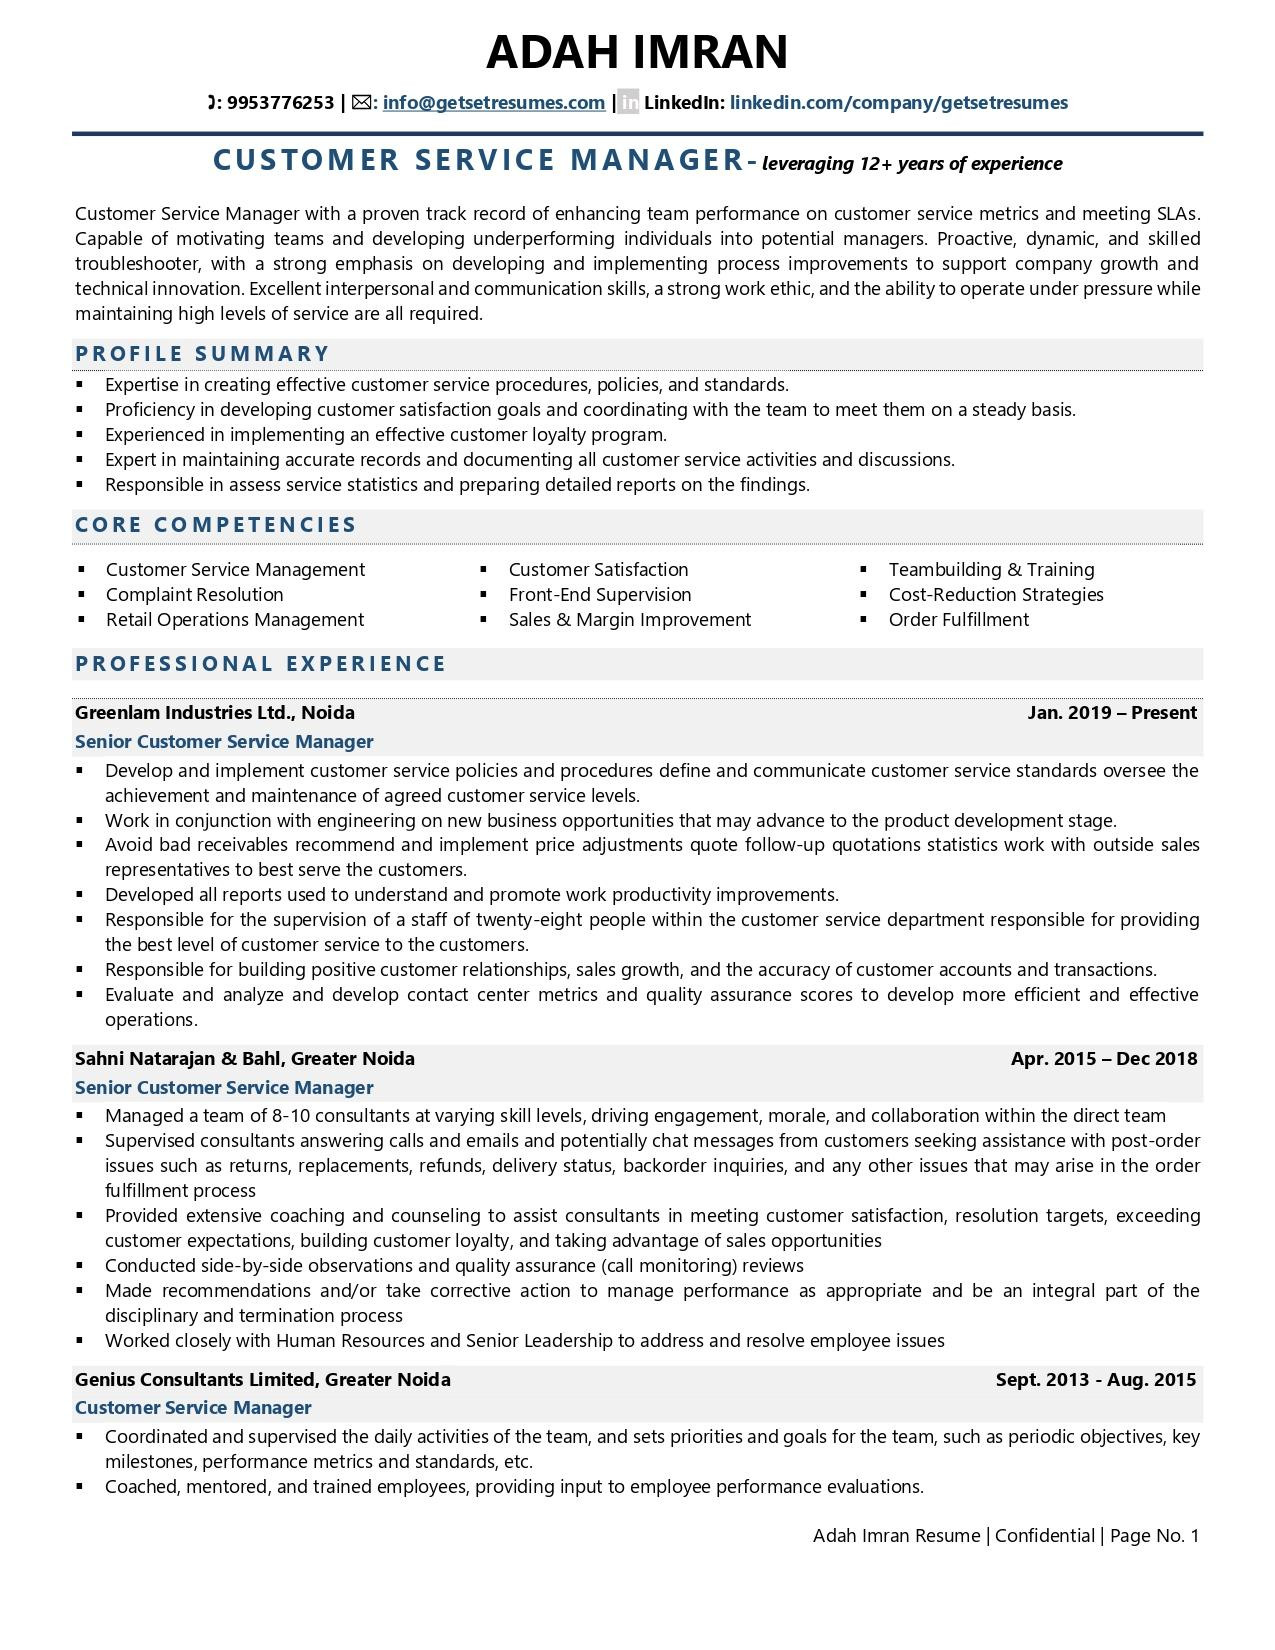 Resume Samples for Customer Service Supervisor Customer Service Manager Resume Examples & Template (with Job …